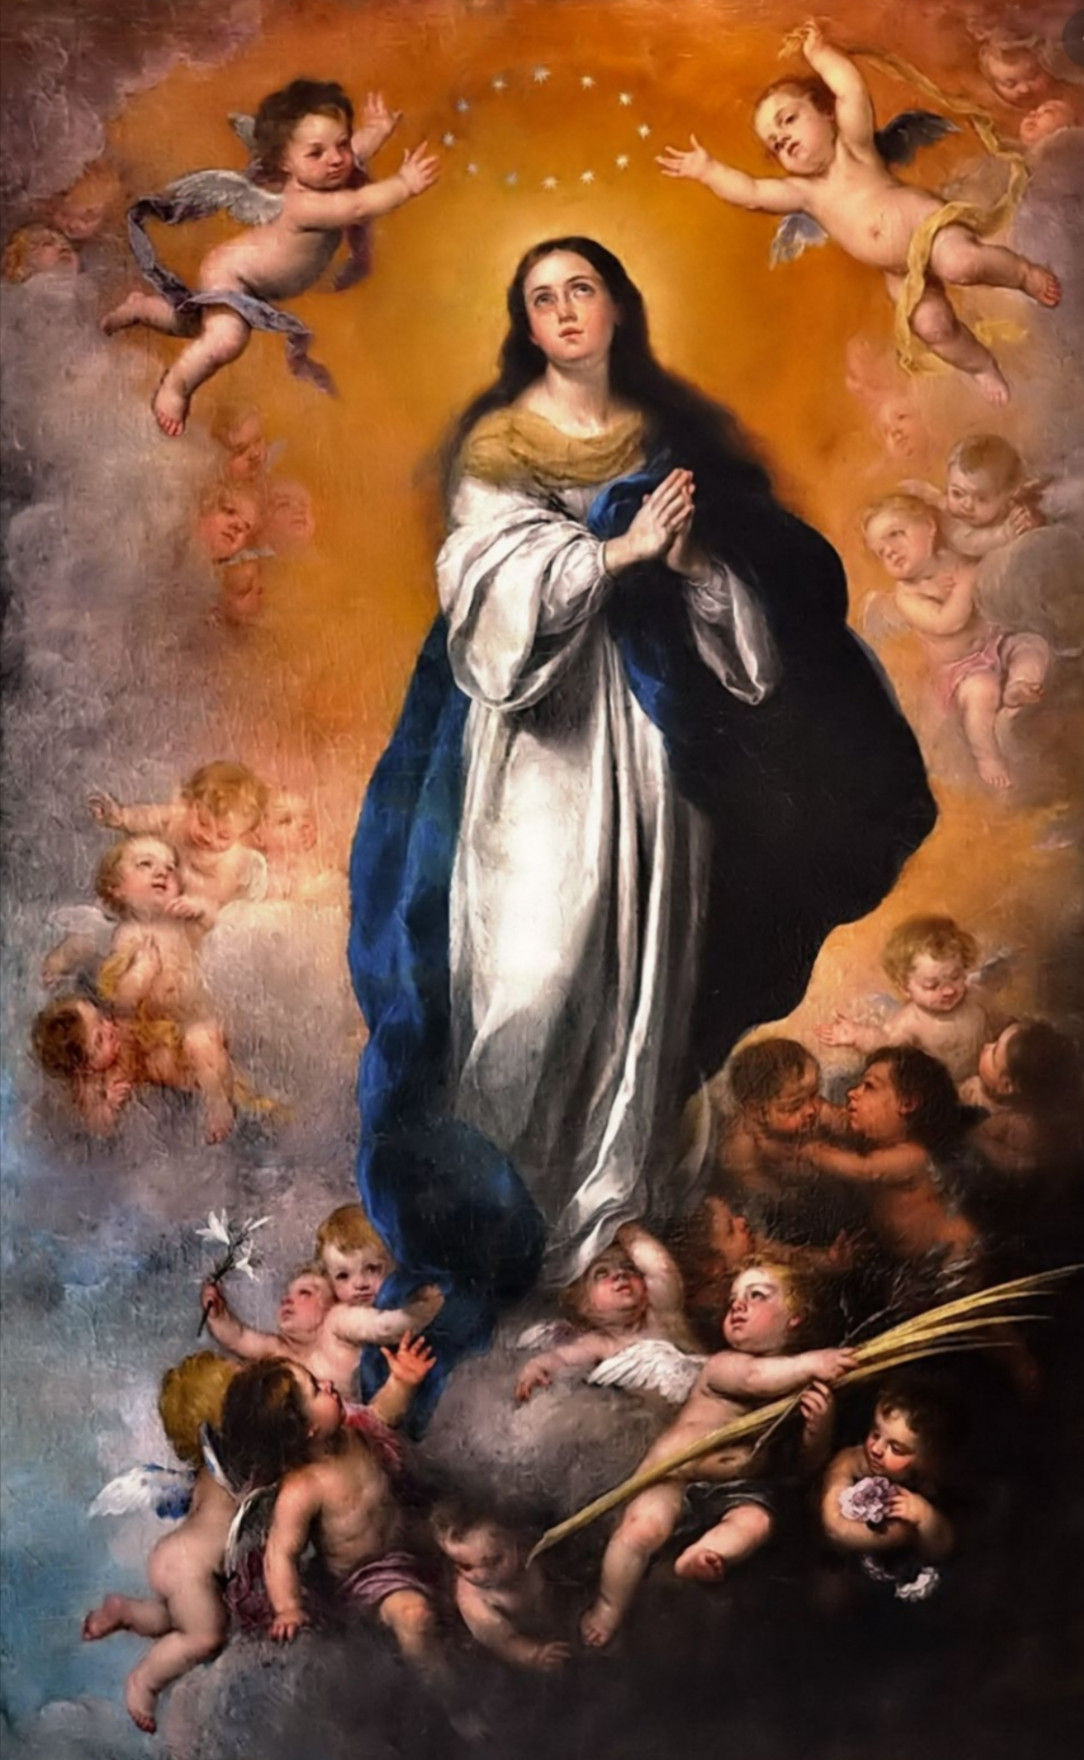 Feast day of Immaculate Conception de Maria, December 8